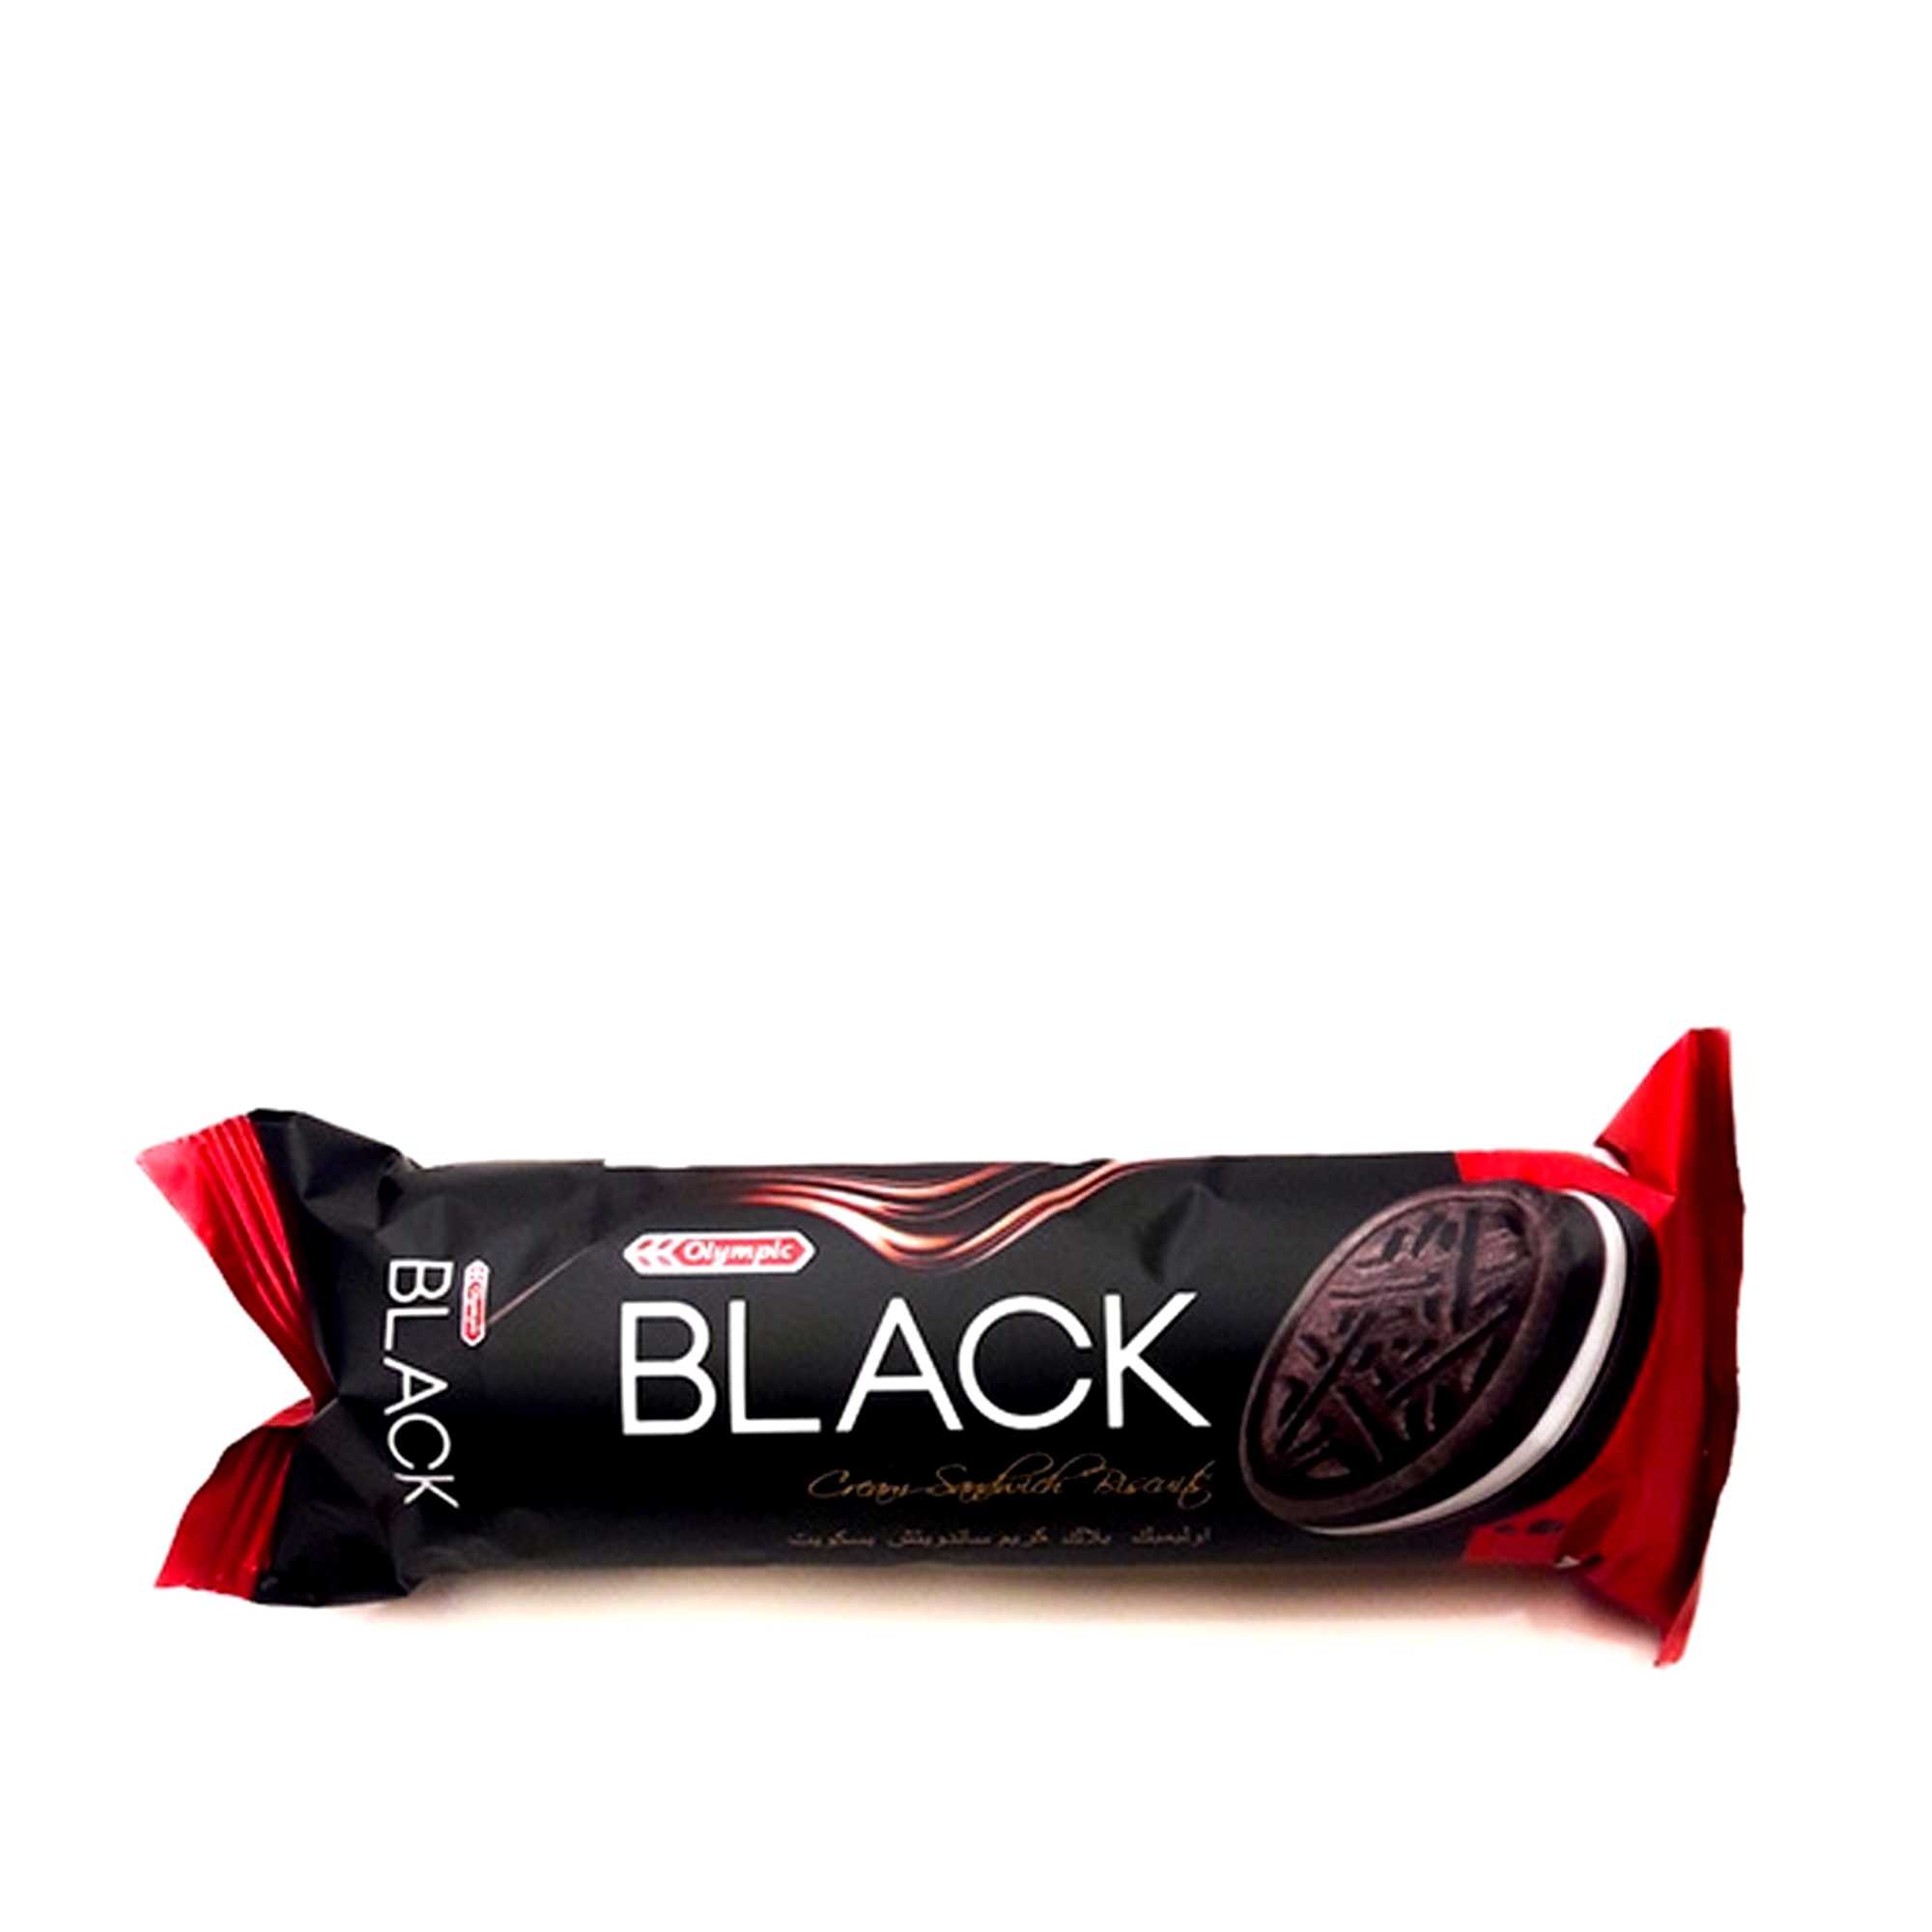 Olympic Black Sandwich  Cream Biscuits 85g 